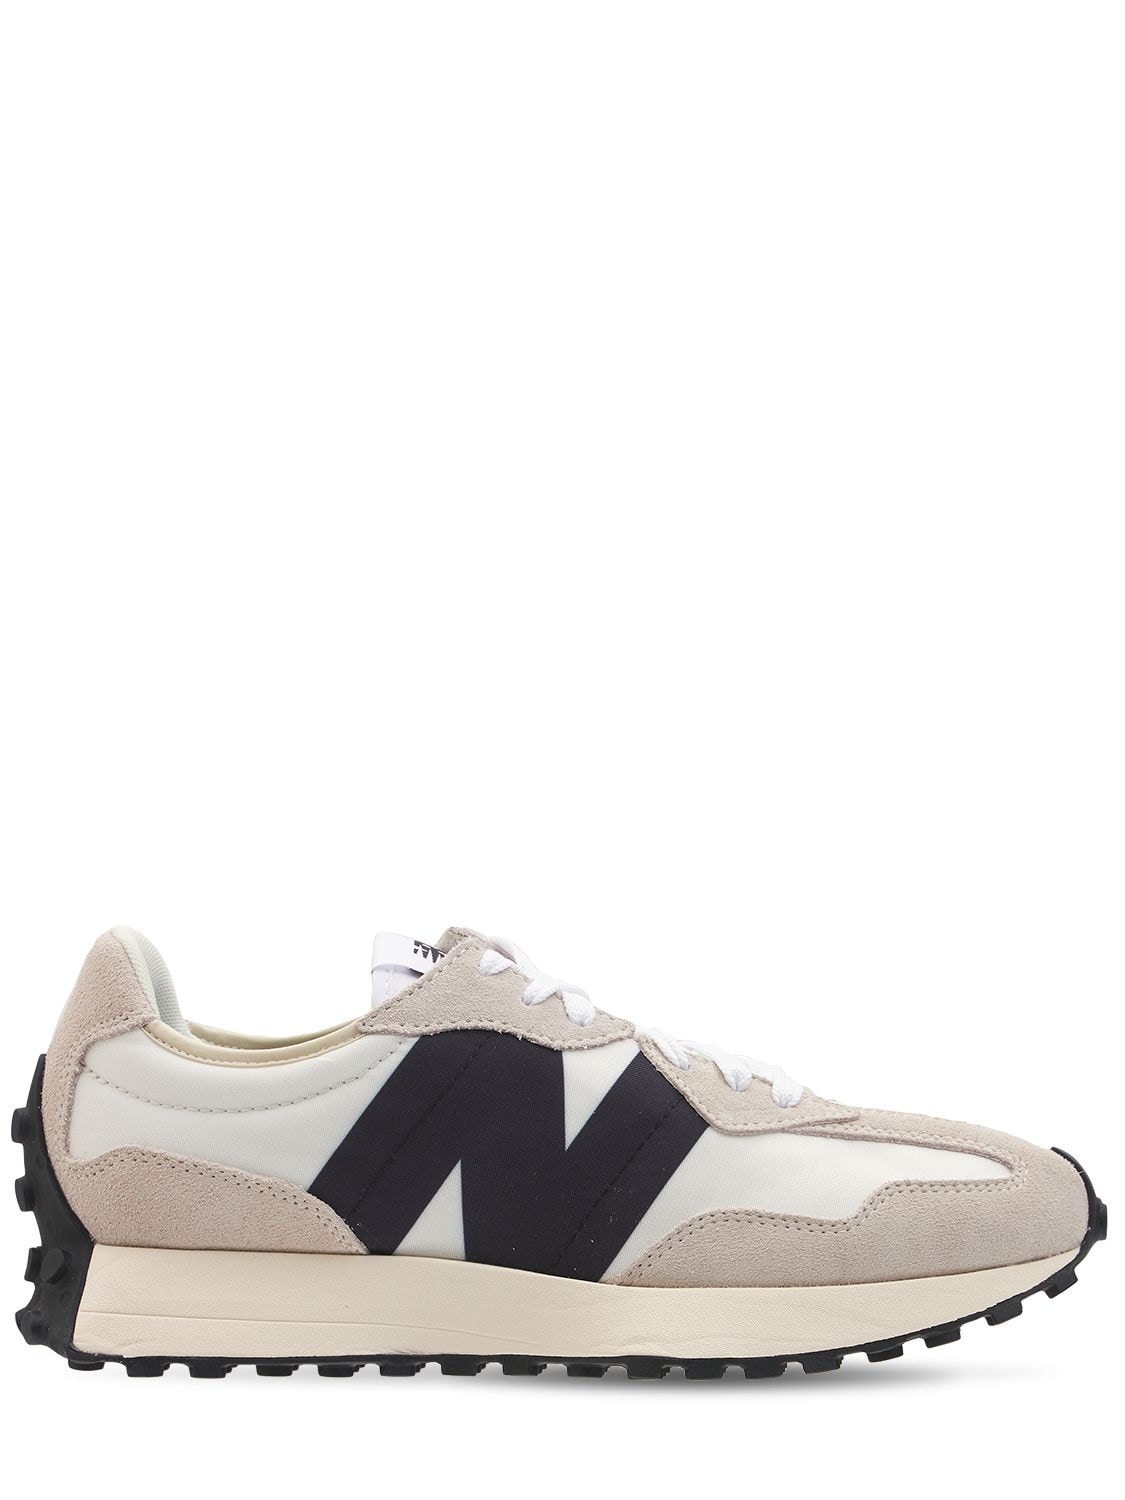 New Balance 327 Trainers In Off White,black